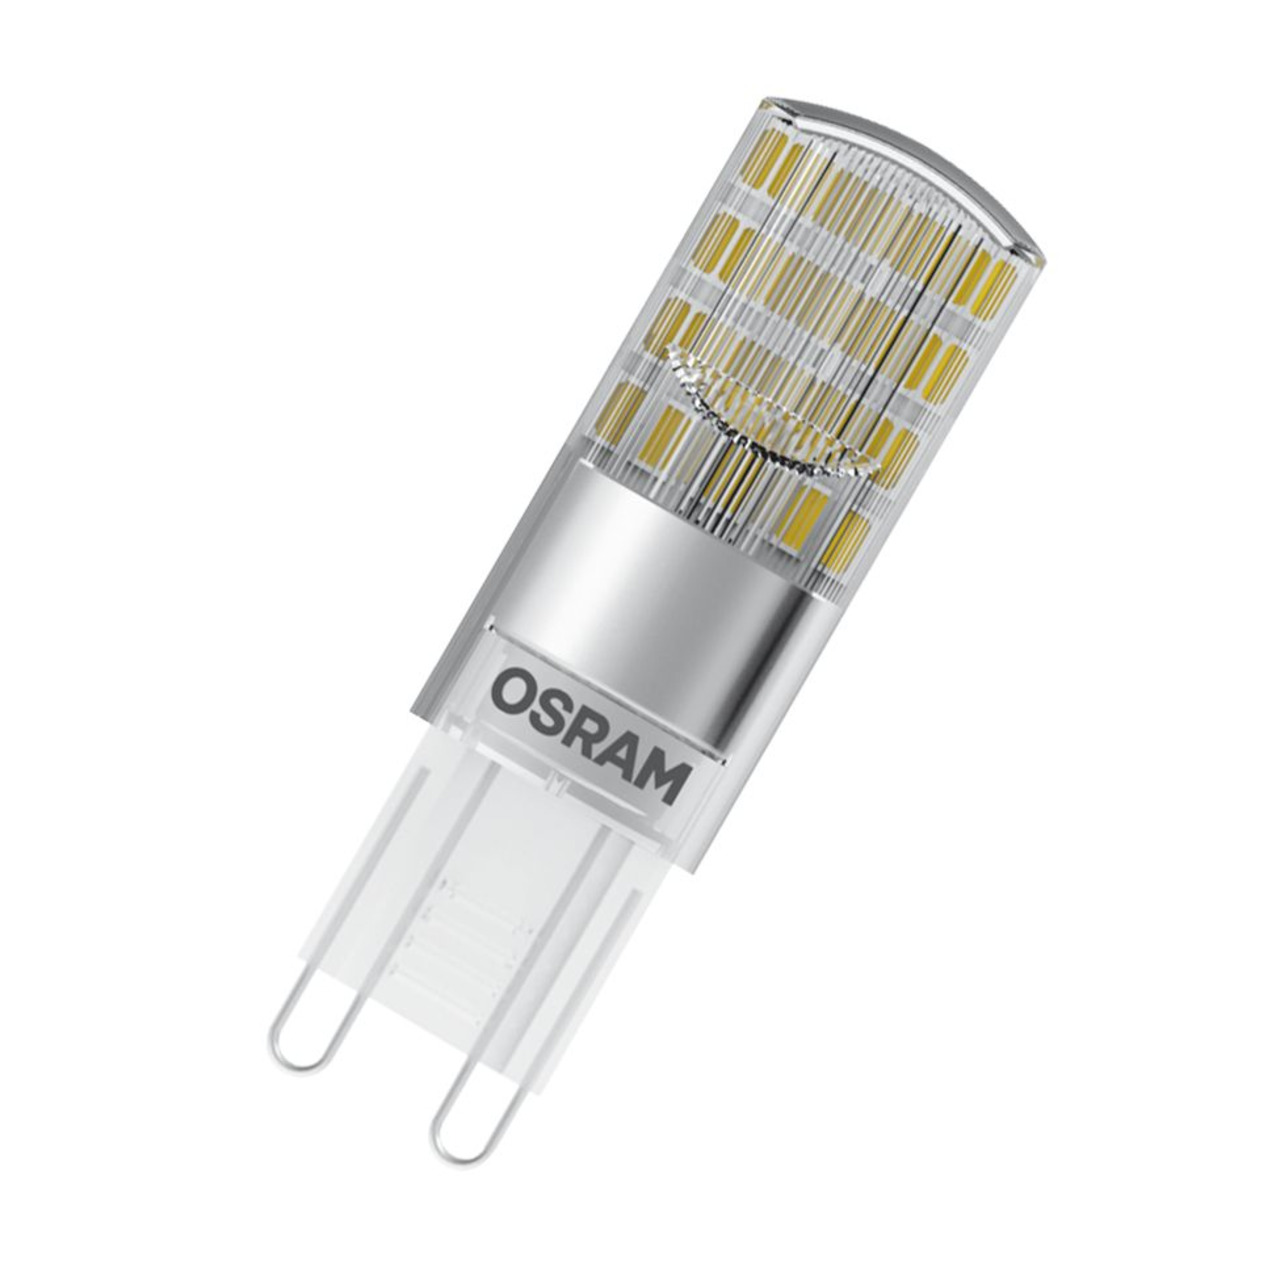 OSRAM 2-6-W-LED-Lampe T15- G9- 320 lm- warmweiss unter Beleuchtung